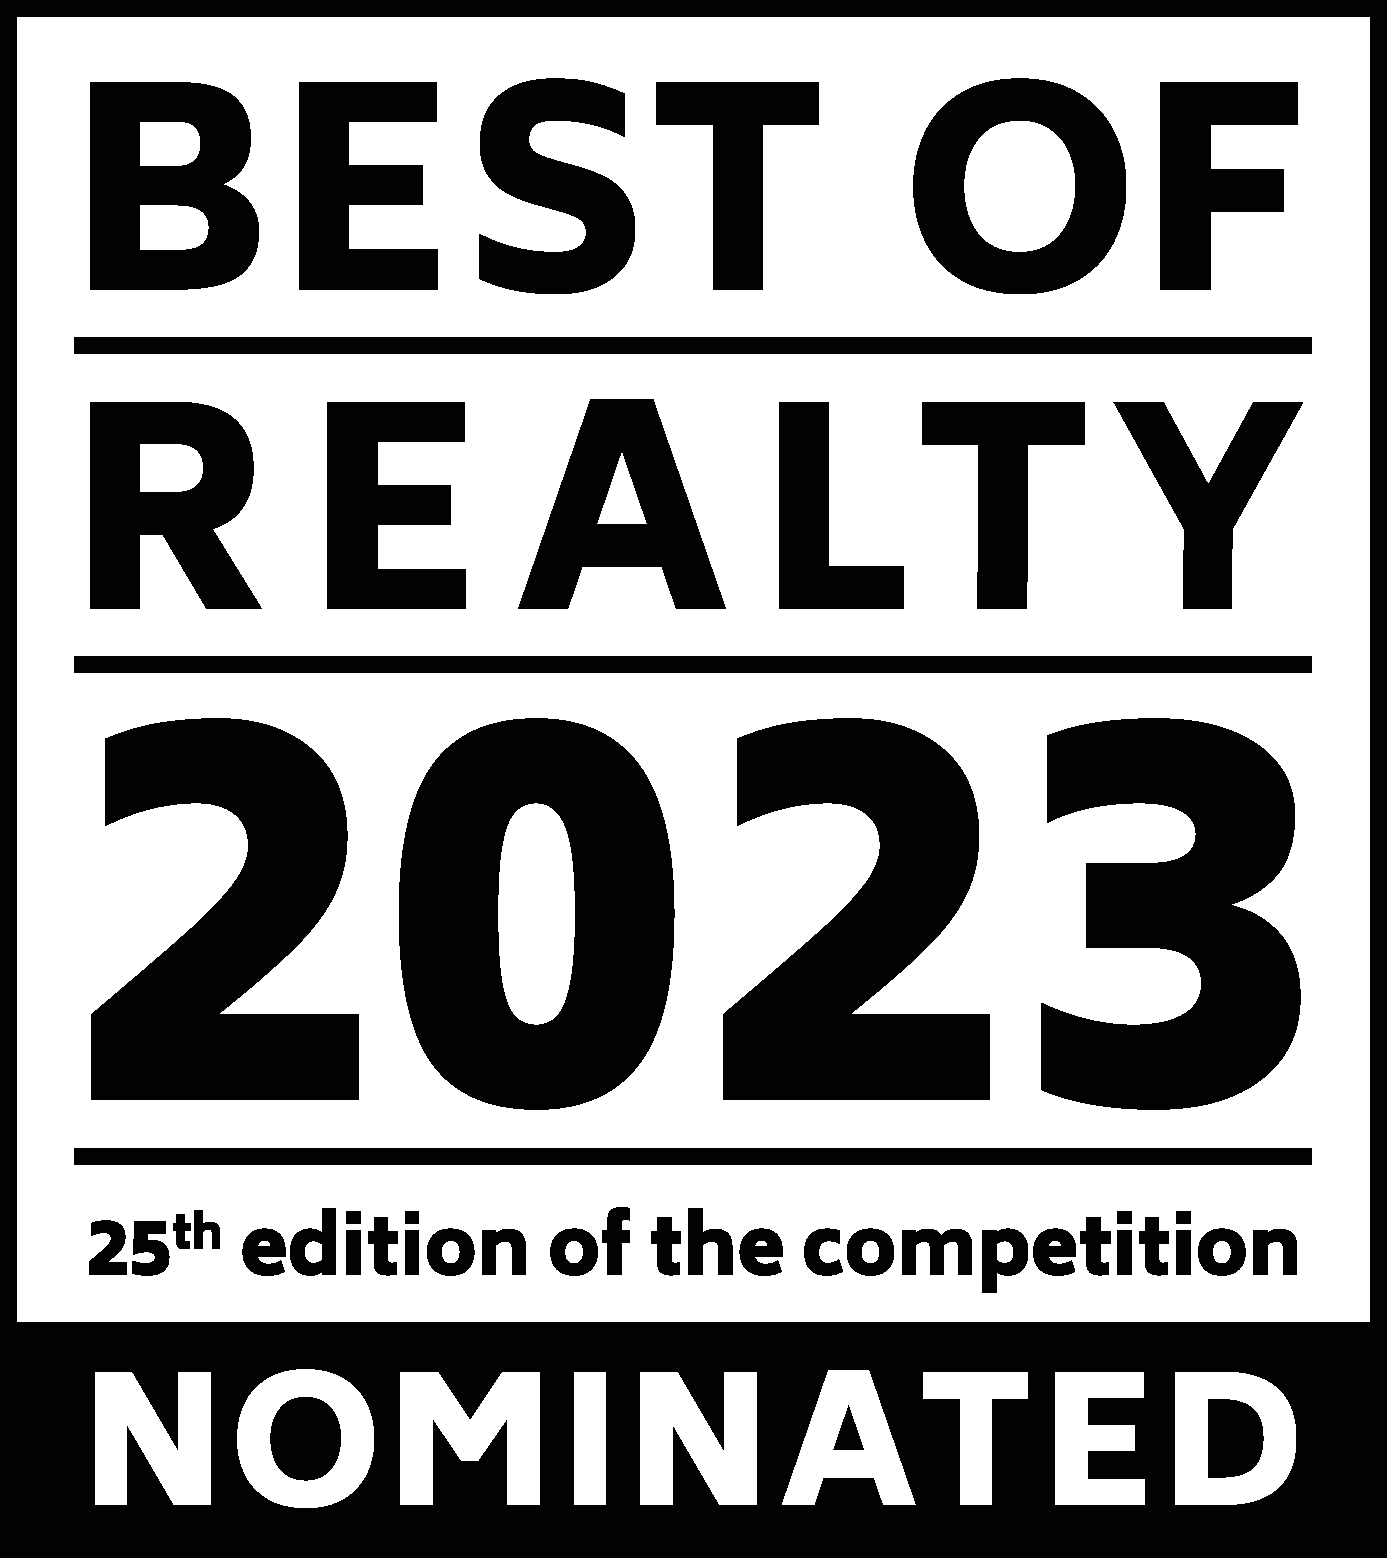 Best of Realty 2023 Nominated